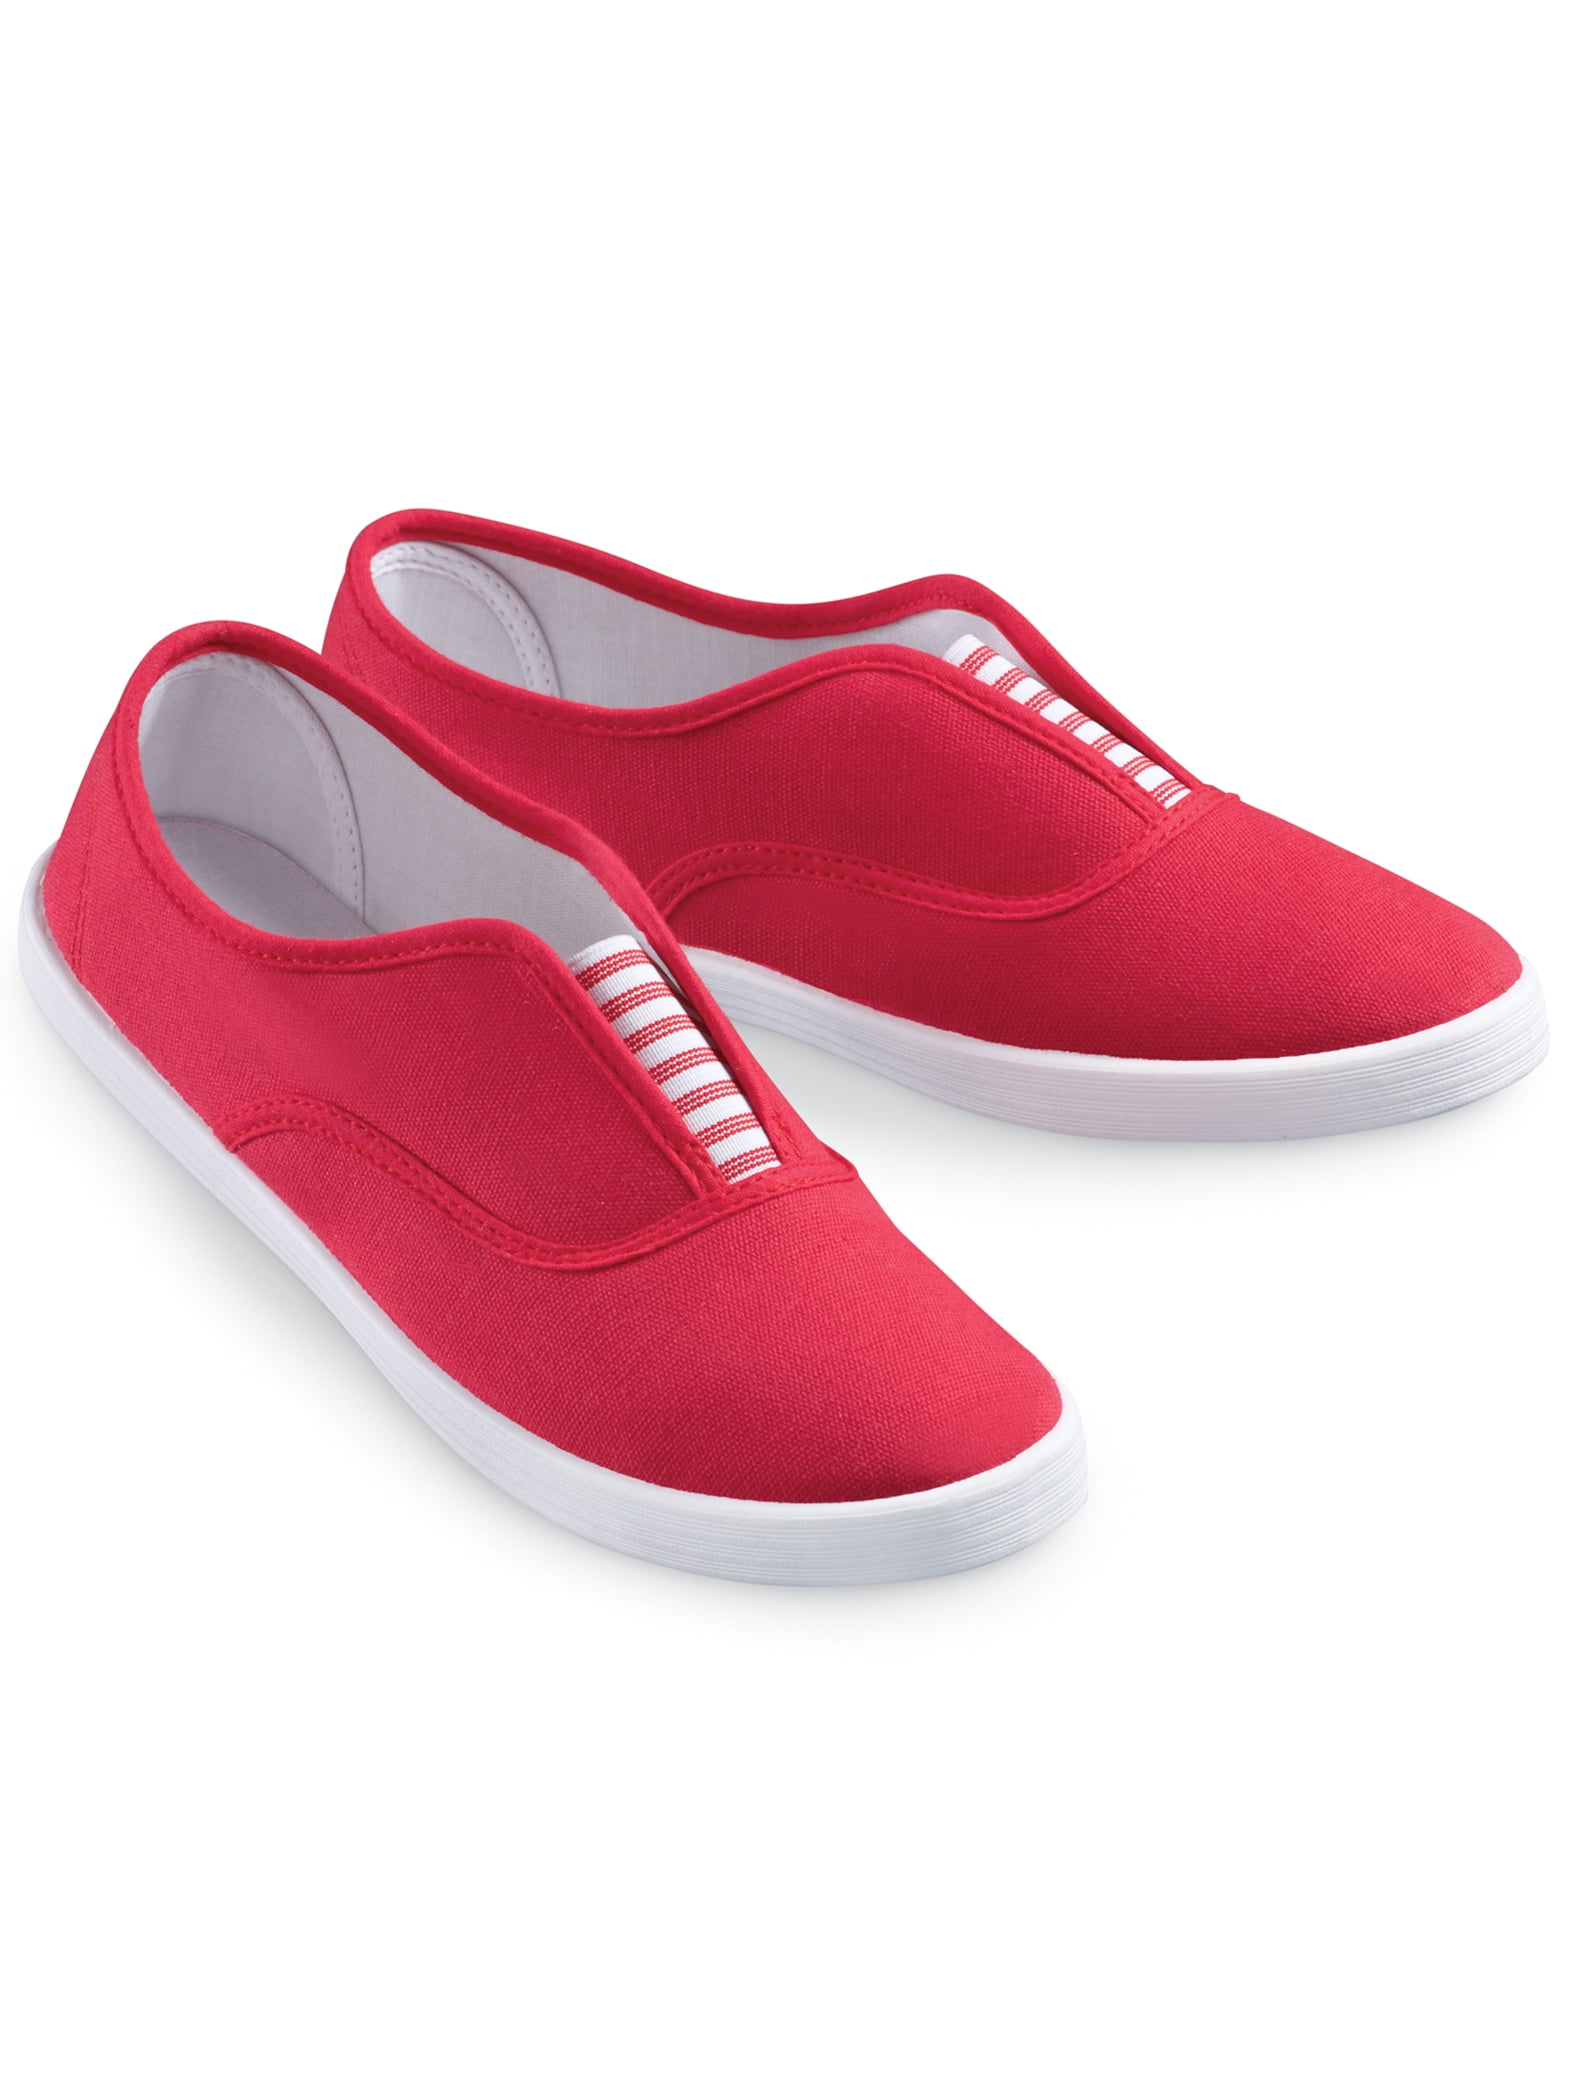 Collections Etc Classic Easy-to-Wear Striped Slip-on Sneakers - Walmart.com